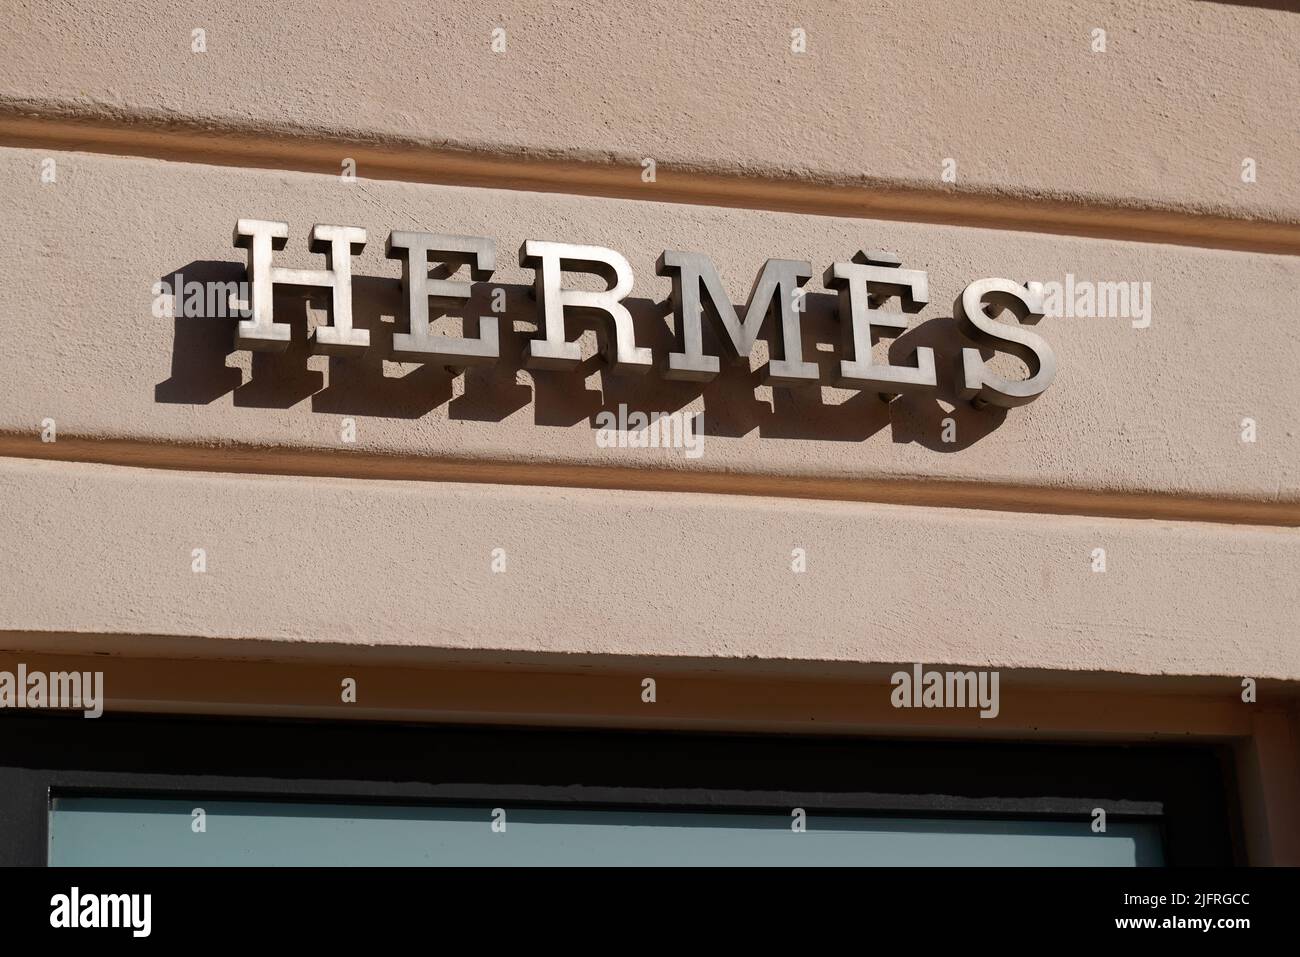 Cannes , paca  France - 06 15 2022 : Hermes logo sign and text brand front wall facade fashion shop luxury goods manufacturer Hermes boutique Stock Photo